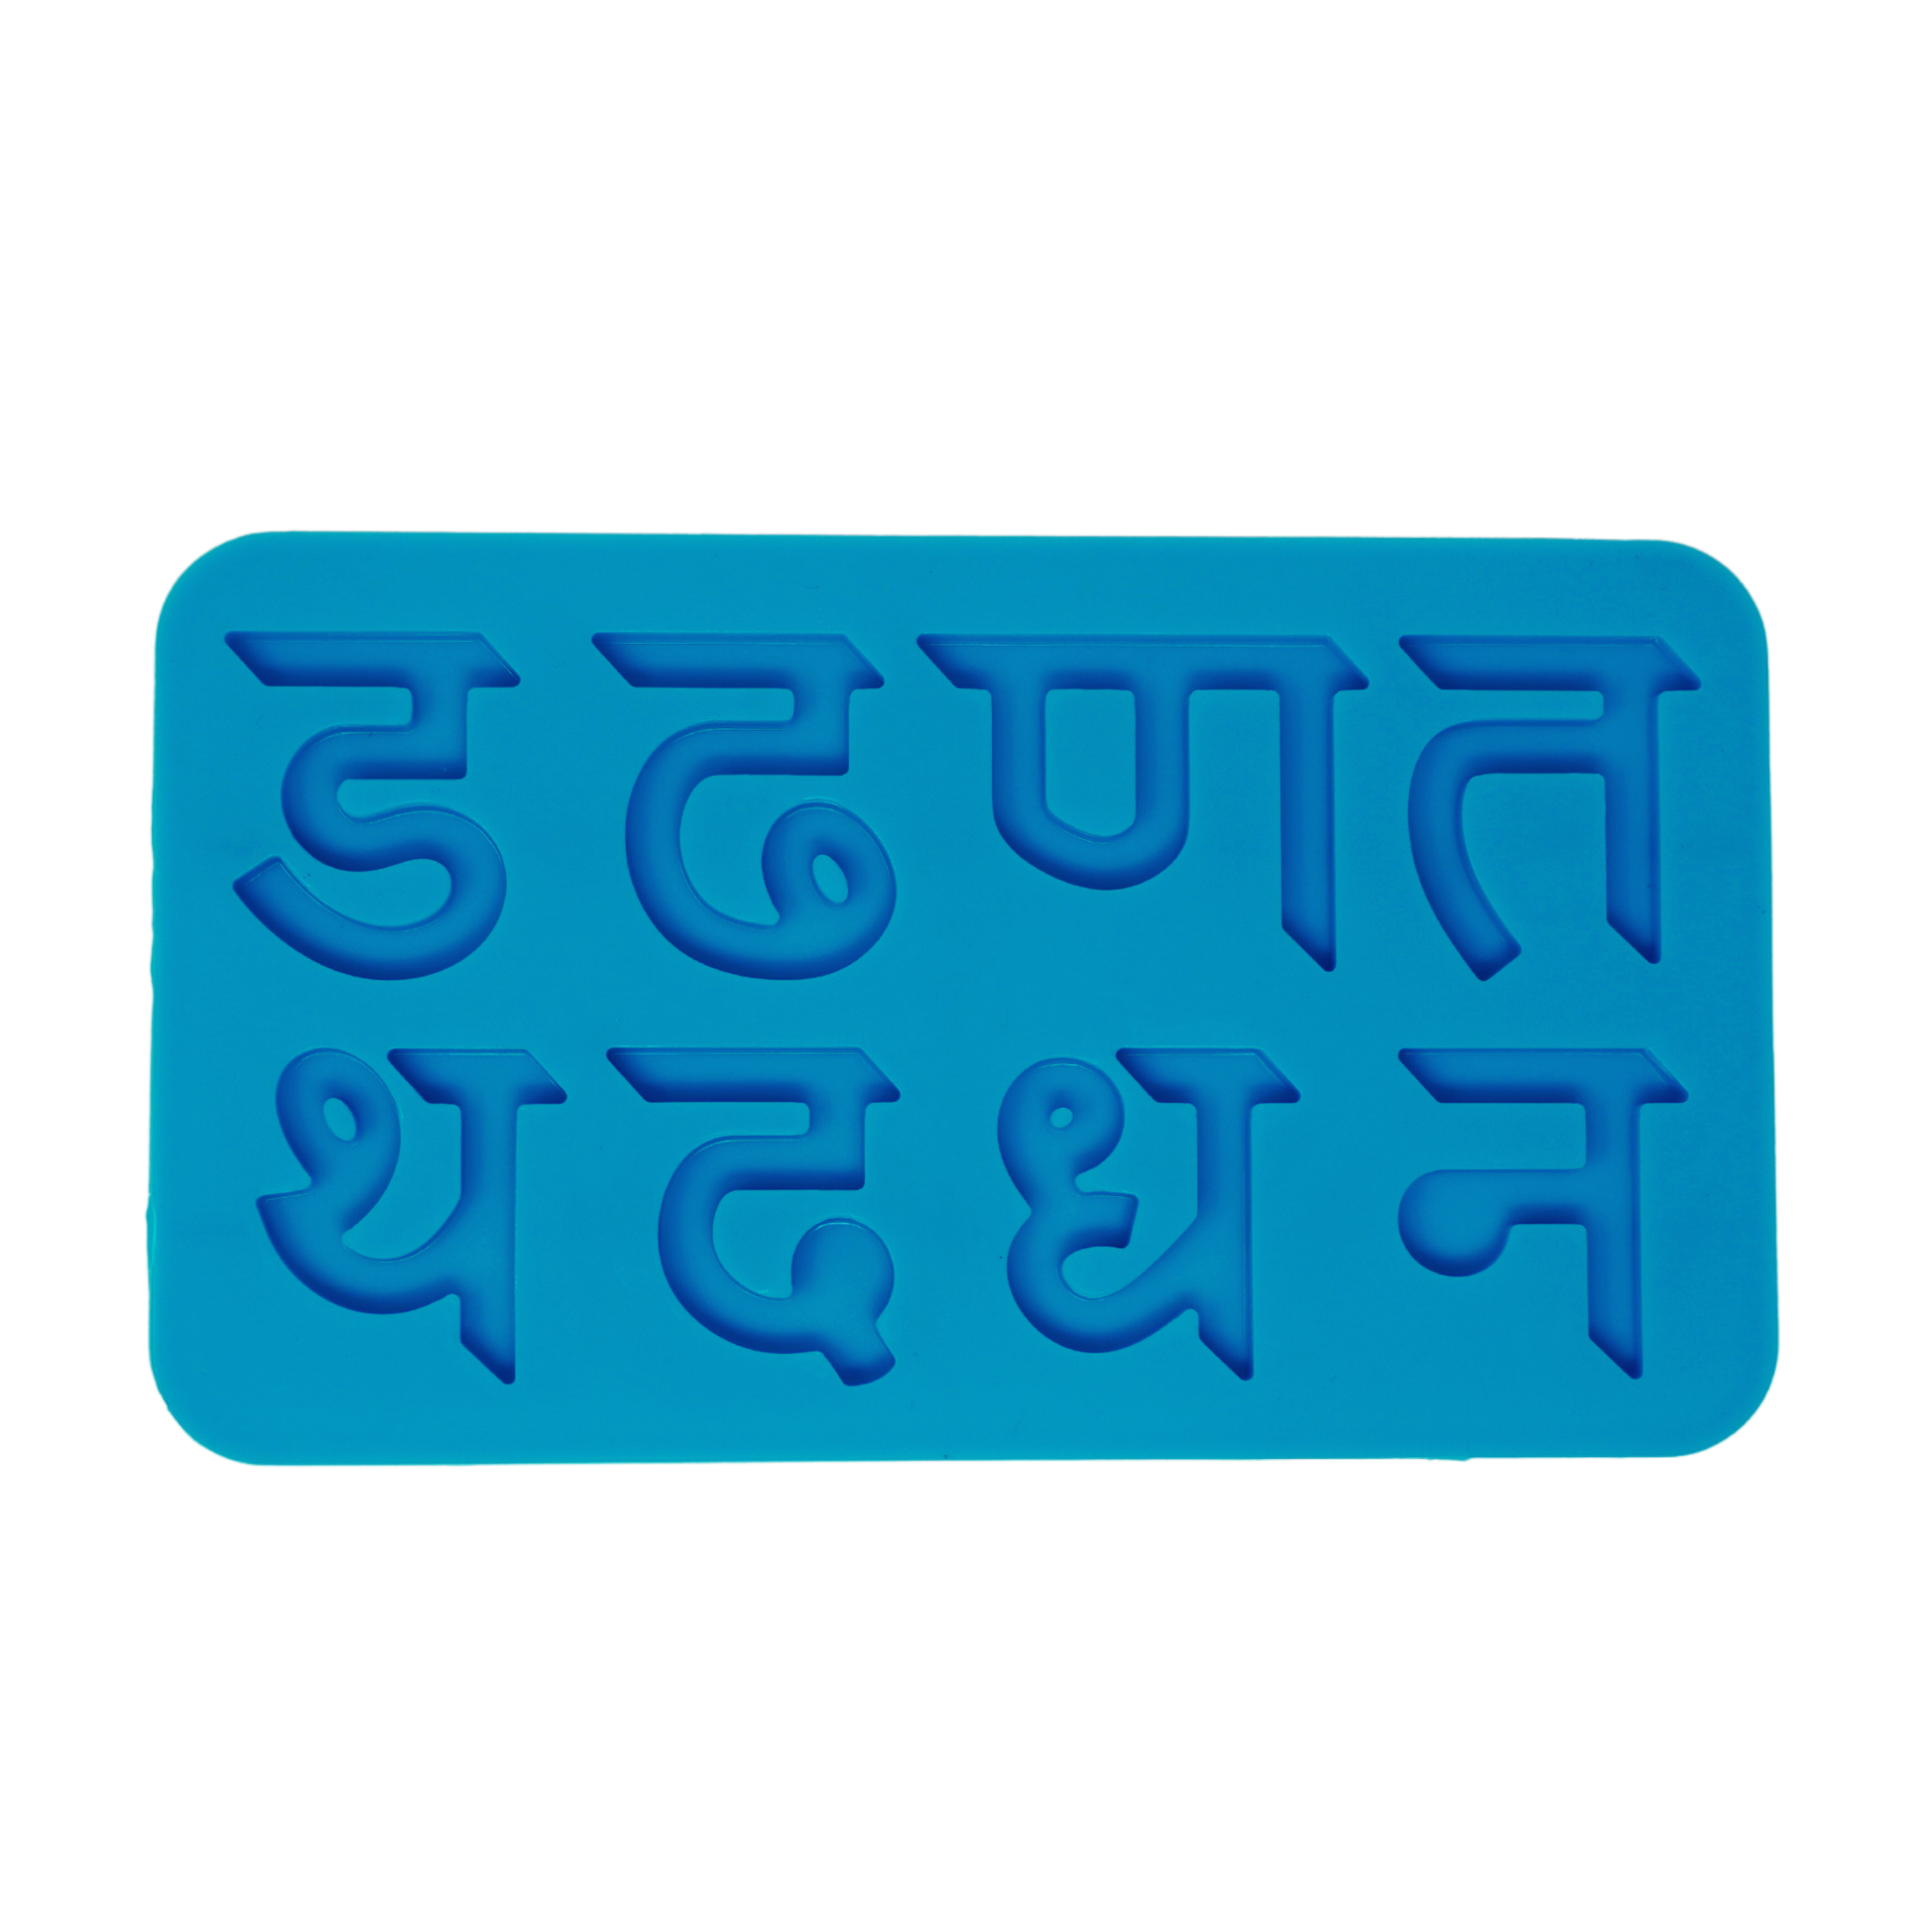 Hindi Alphabets Mould 2 - Duh - The Mould Story